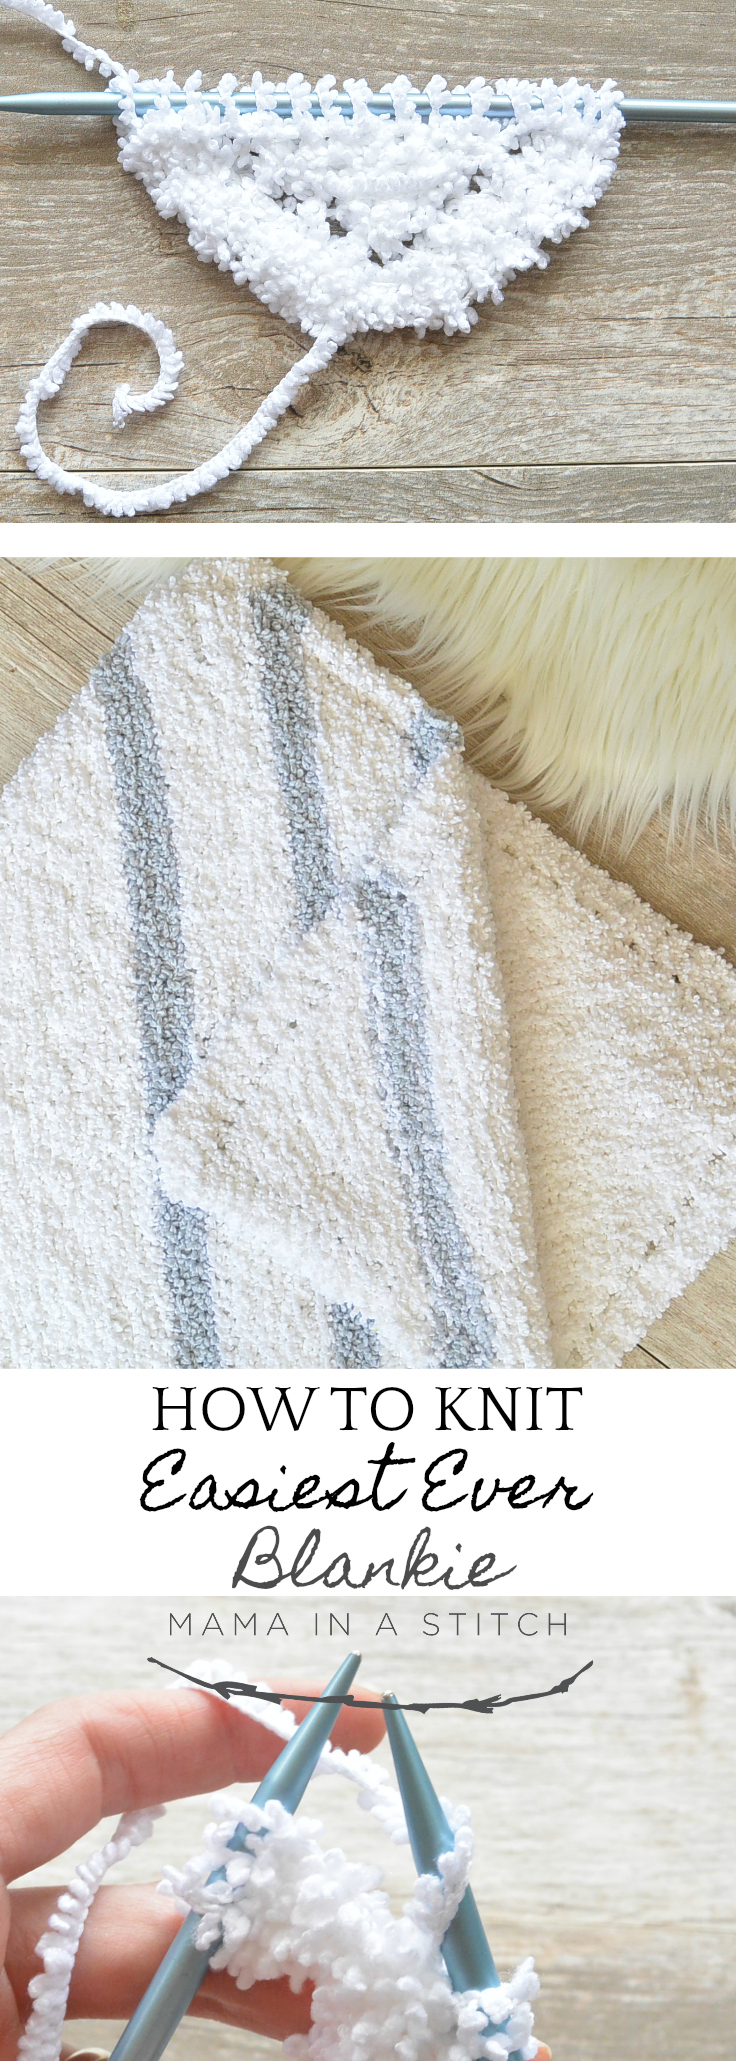 How To Knit the Easiest Baby Blankie - Luxe Blankie Knitting Pattern